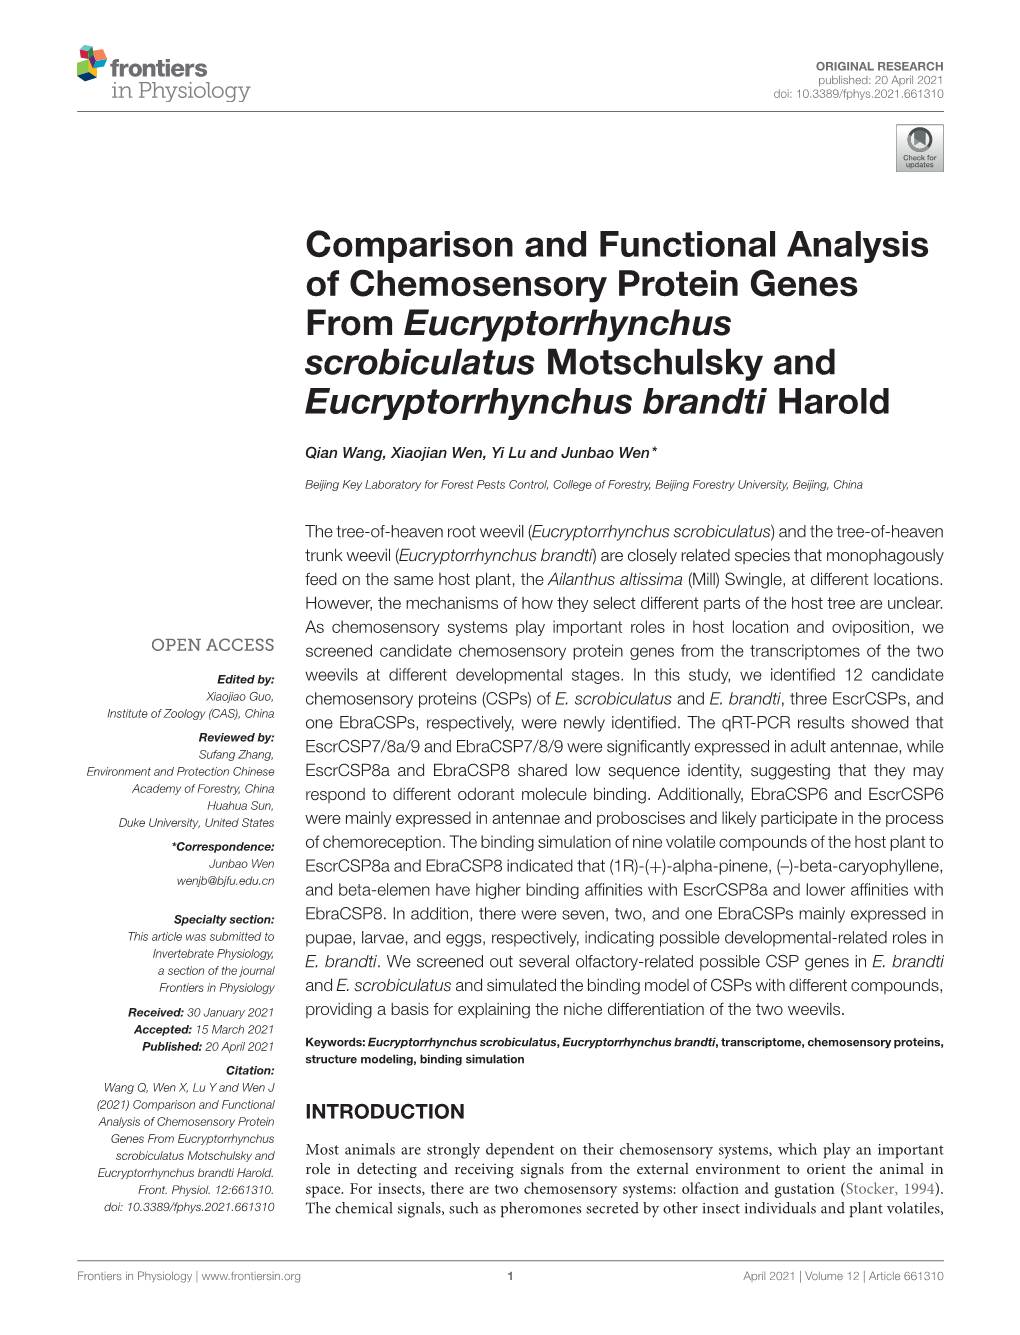 Comparison and Functional Analysis of Chemosensory Protein Genes from Eucryptorrhynchus Scrobiculatus Motschulsky and Eucryptorrhynchus Brandti Harold